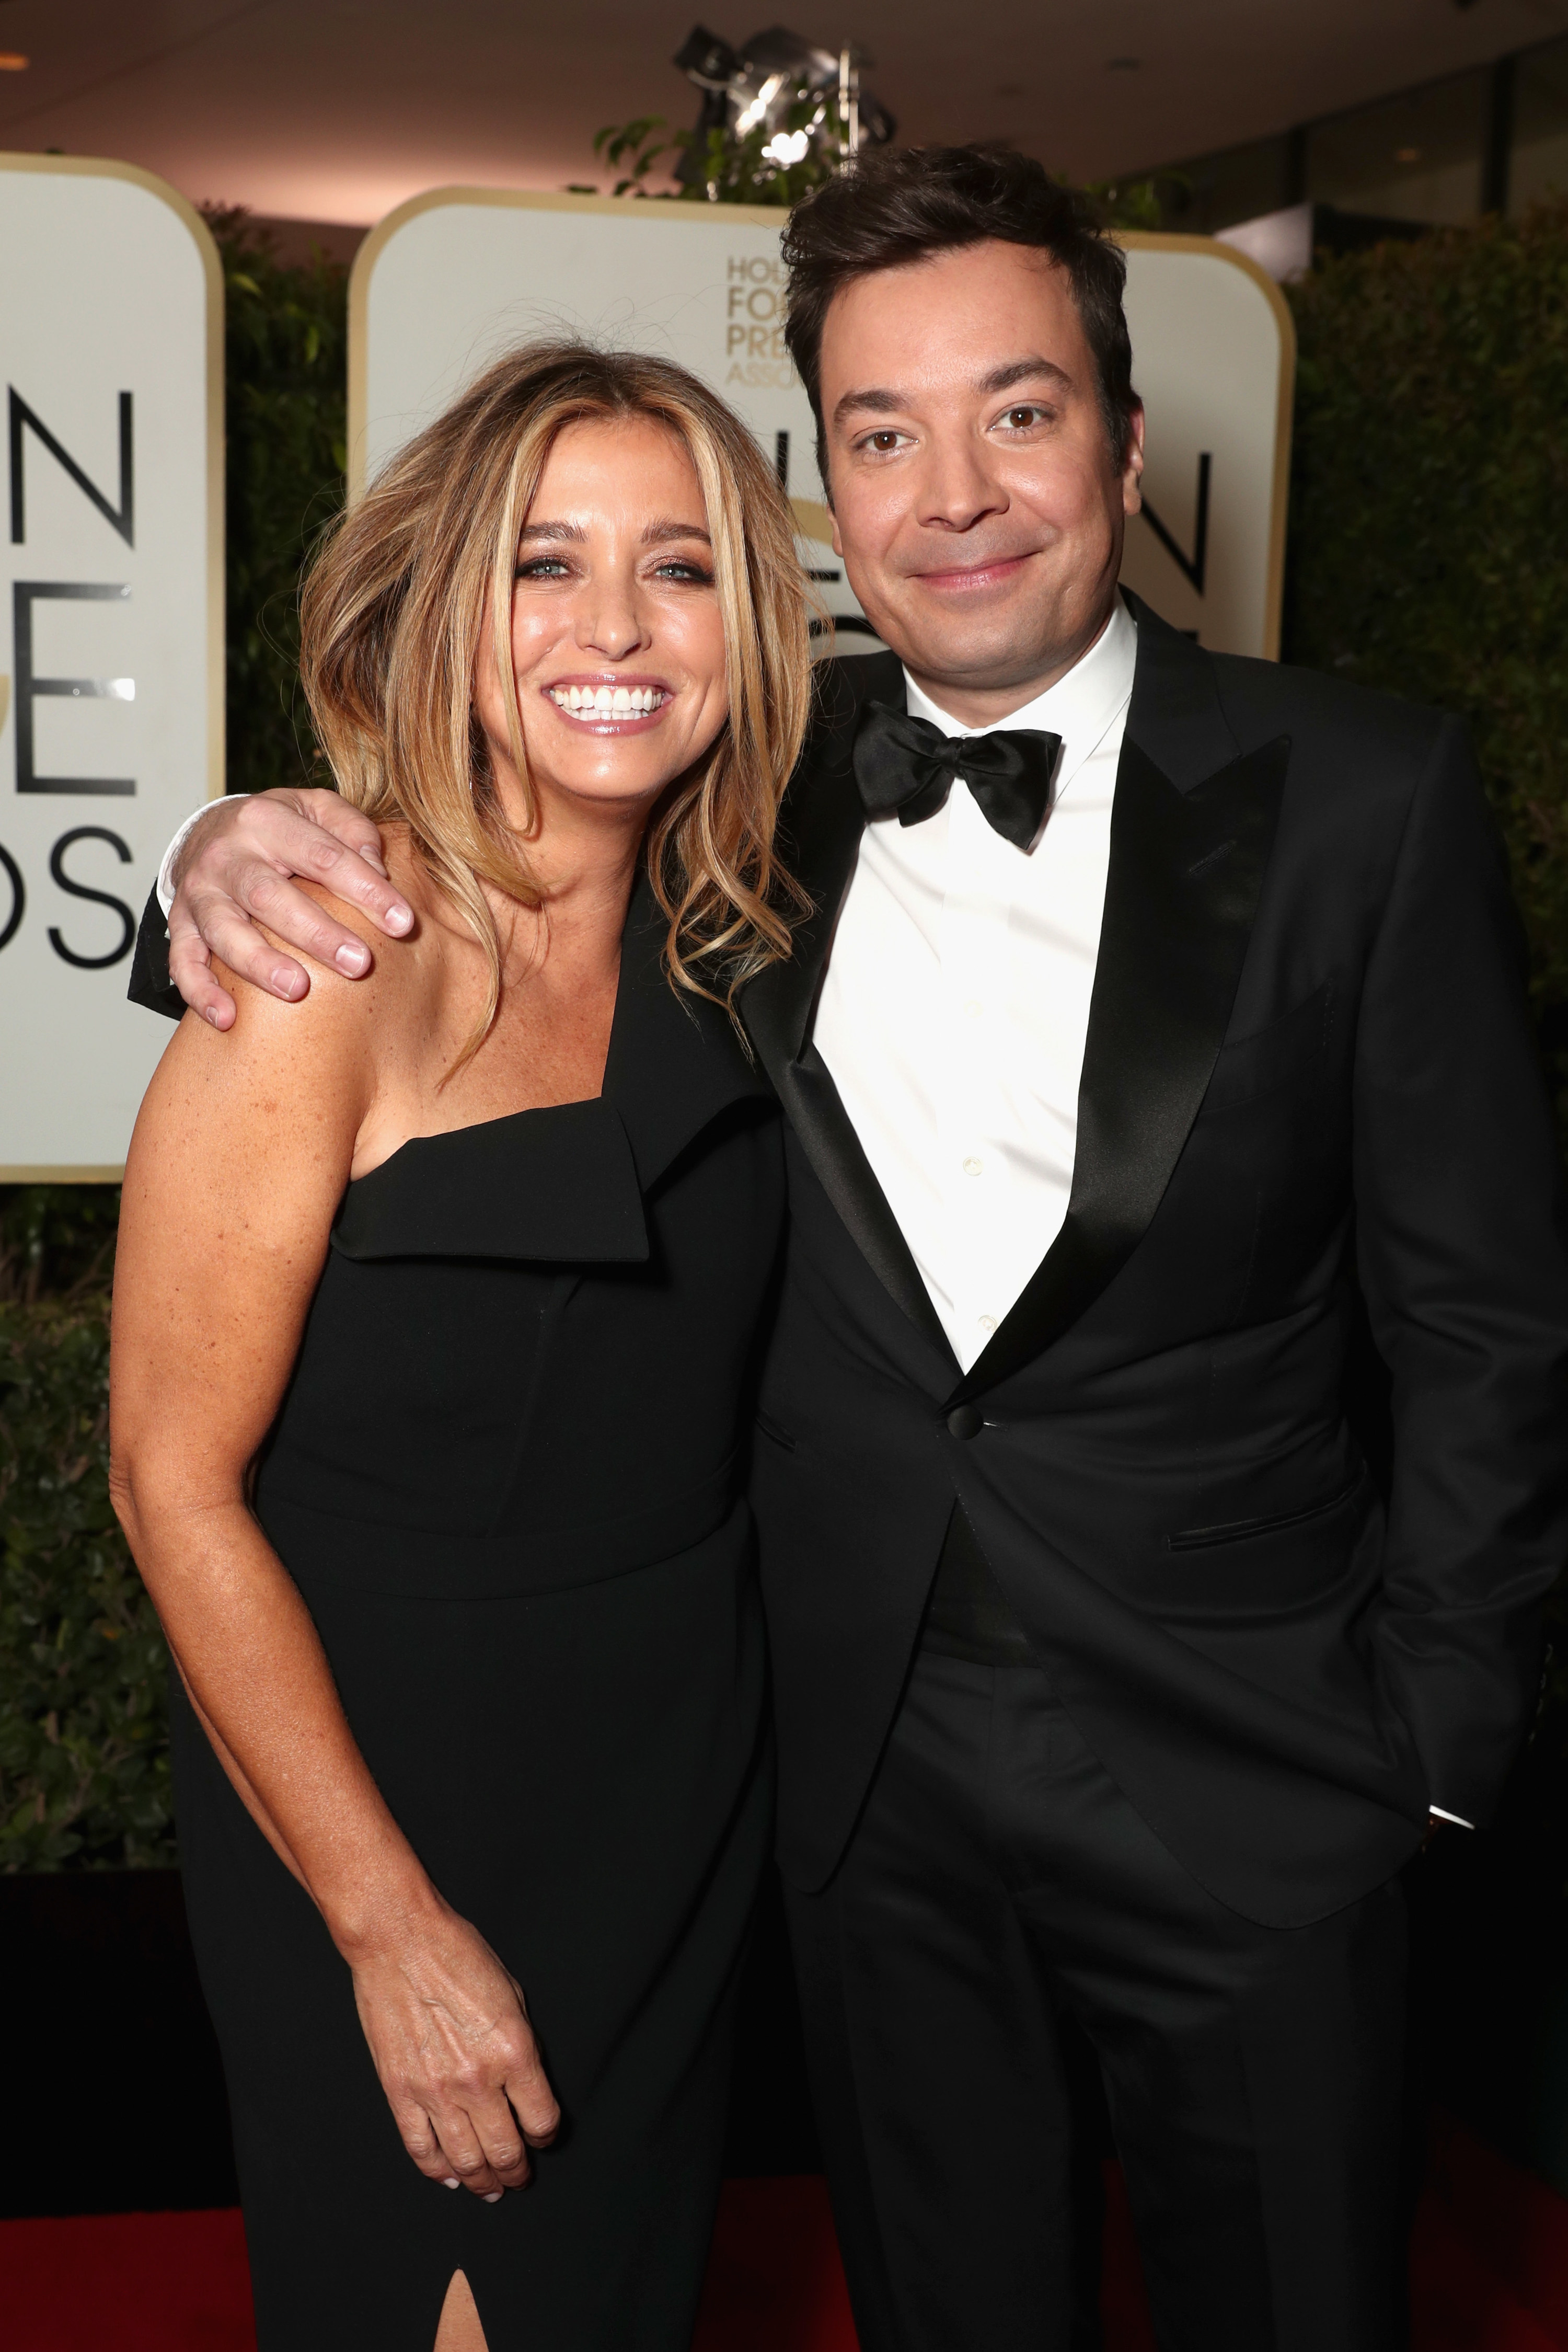 Nancy Juvonen and Jimmy Fallon smile at the 2017 Golden Globes